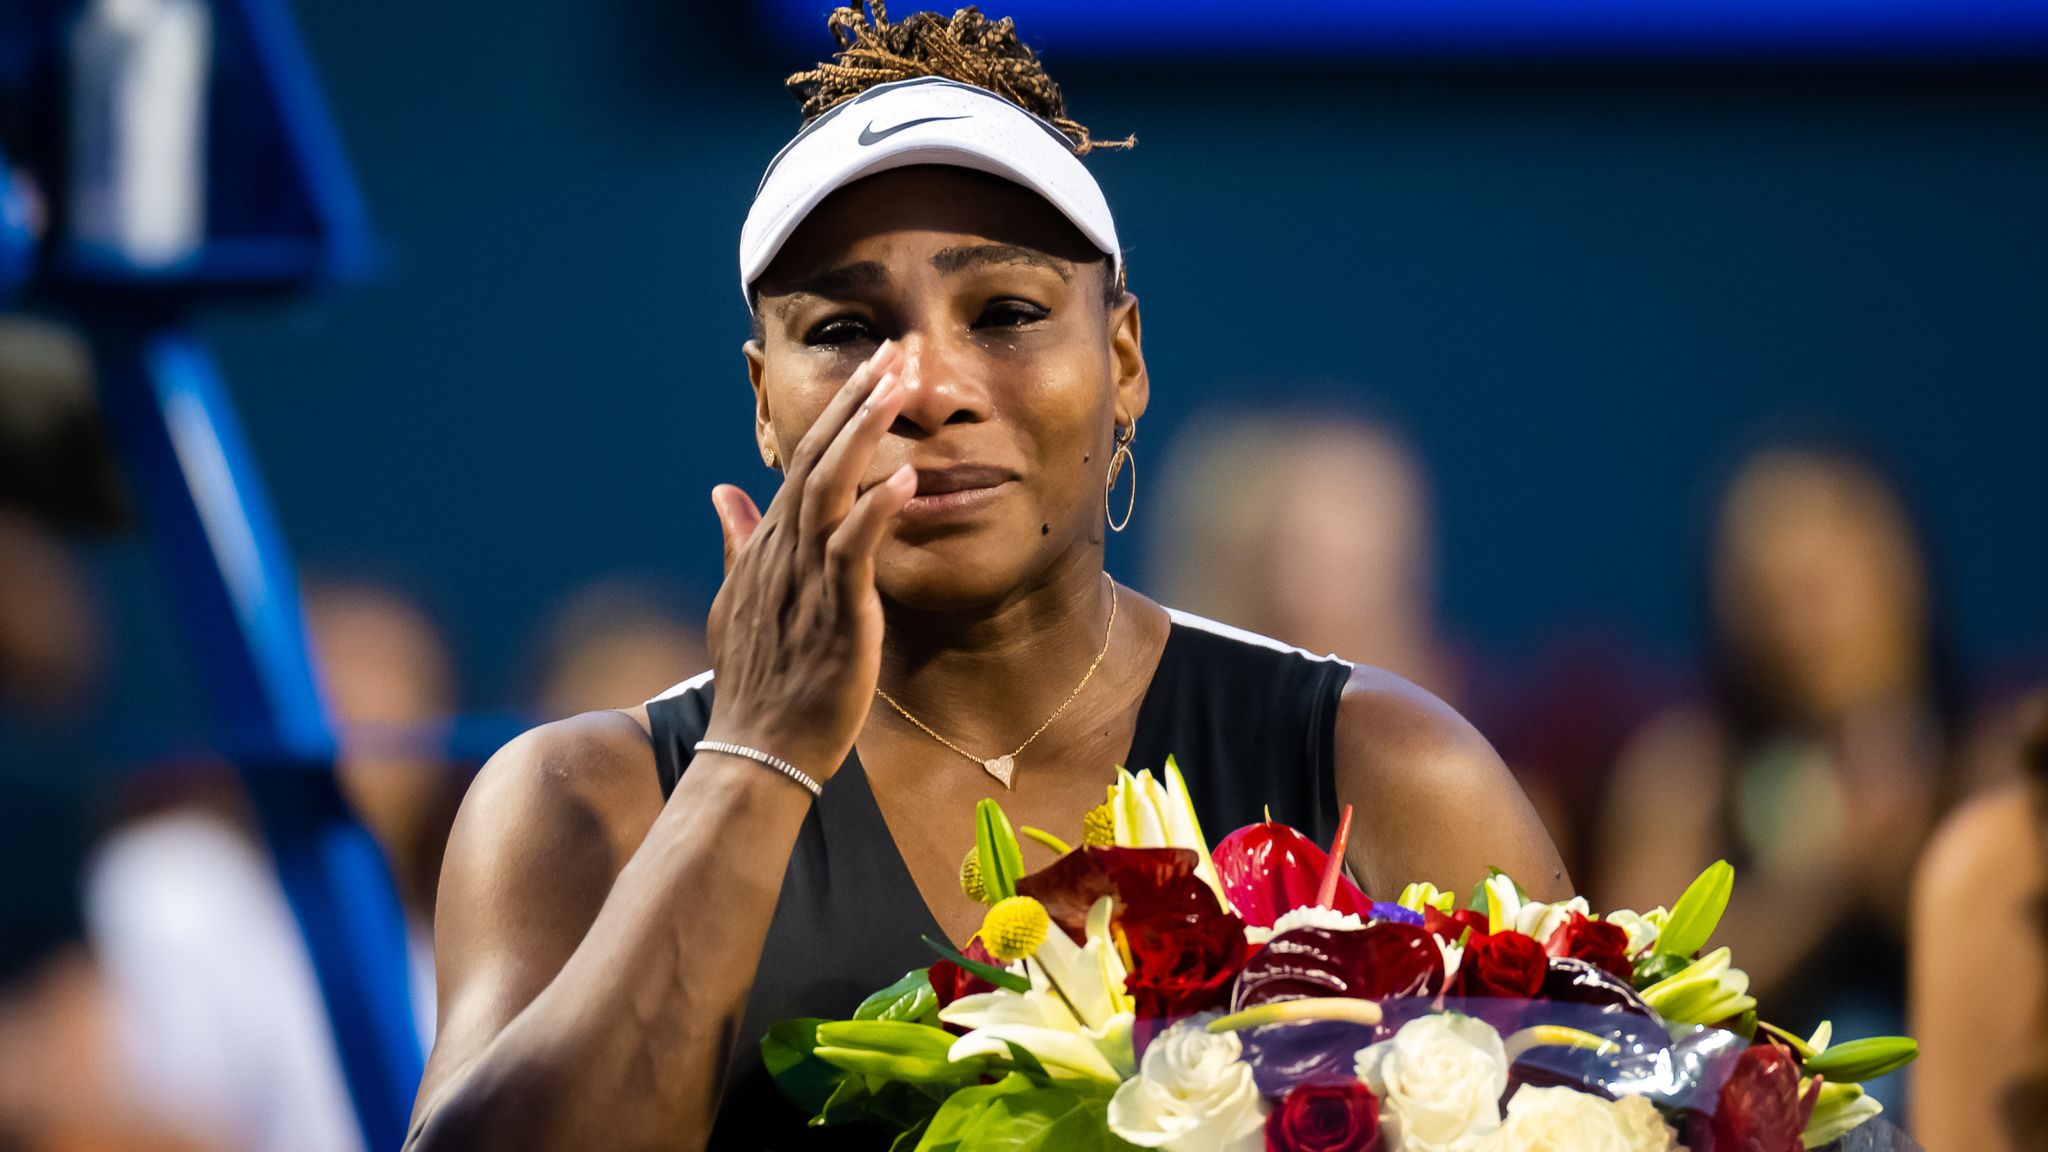 Serena Williams beaten in Toronto in her first defeat since announcing her imminent retirement from tennis | Tennis News | Sky Sports